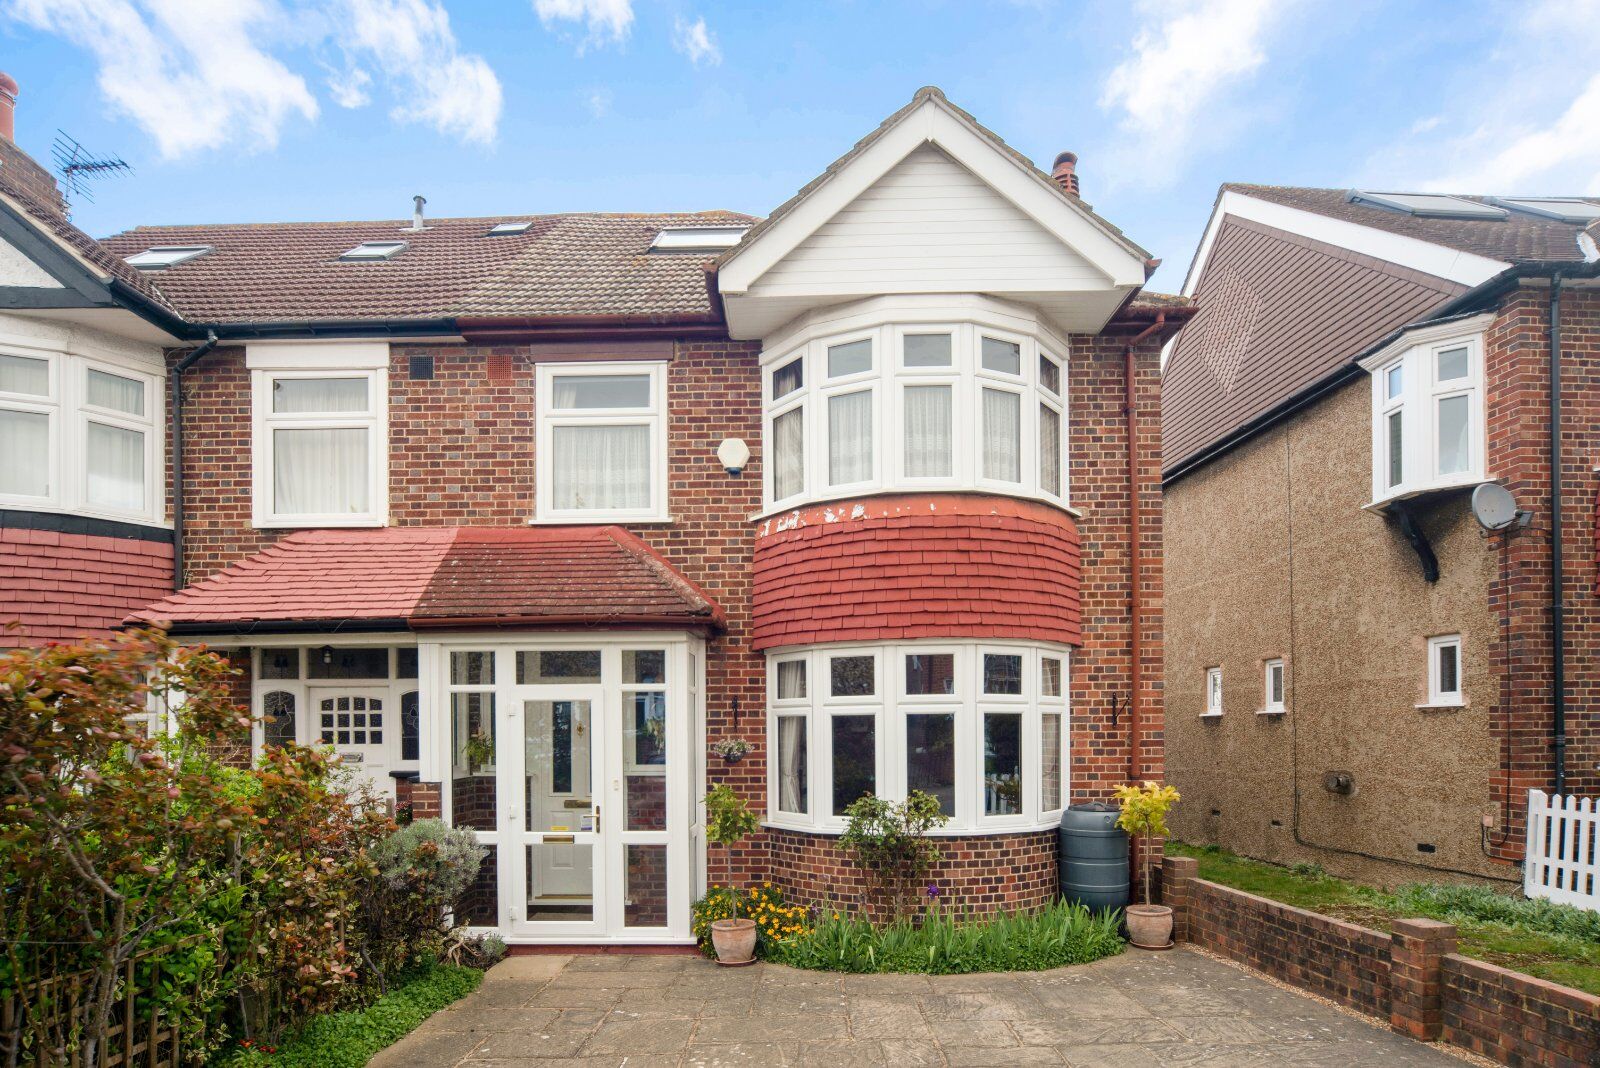 3 bedroom semi detached house for sale Linkway, Raynes Park, SW20, main image